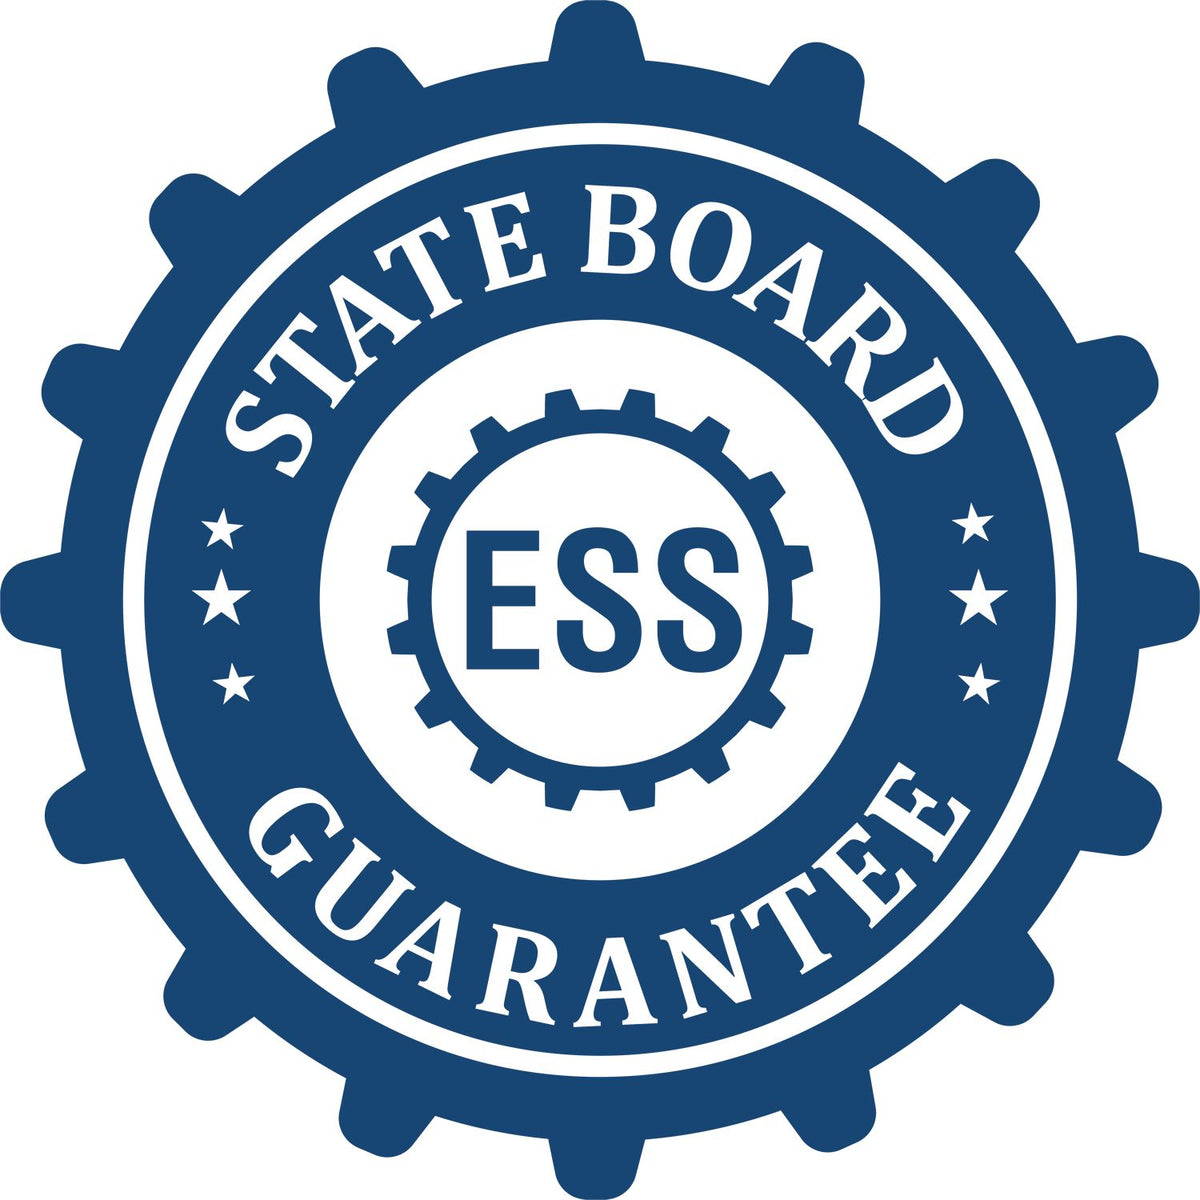 An emblem in a gear shape illustrating a state board guarantee for the Texas Professional Geologist Seal Stamp